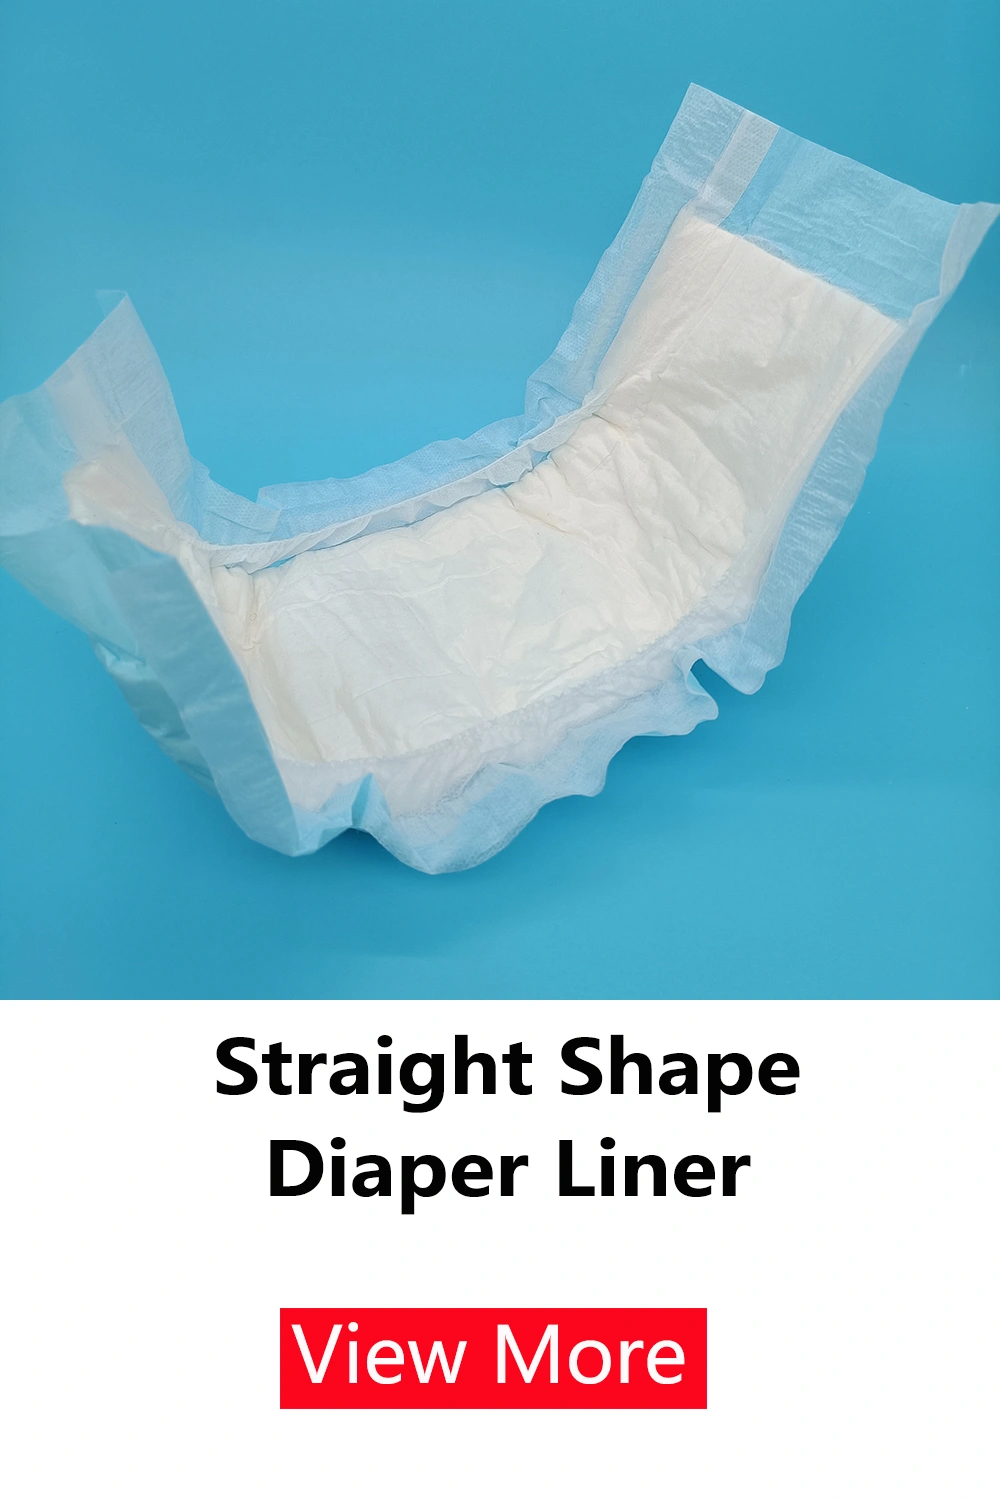 straight shape diaper liner picture